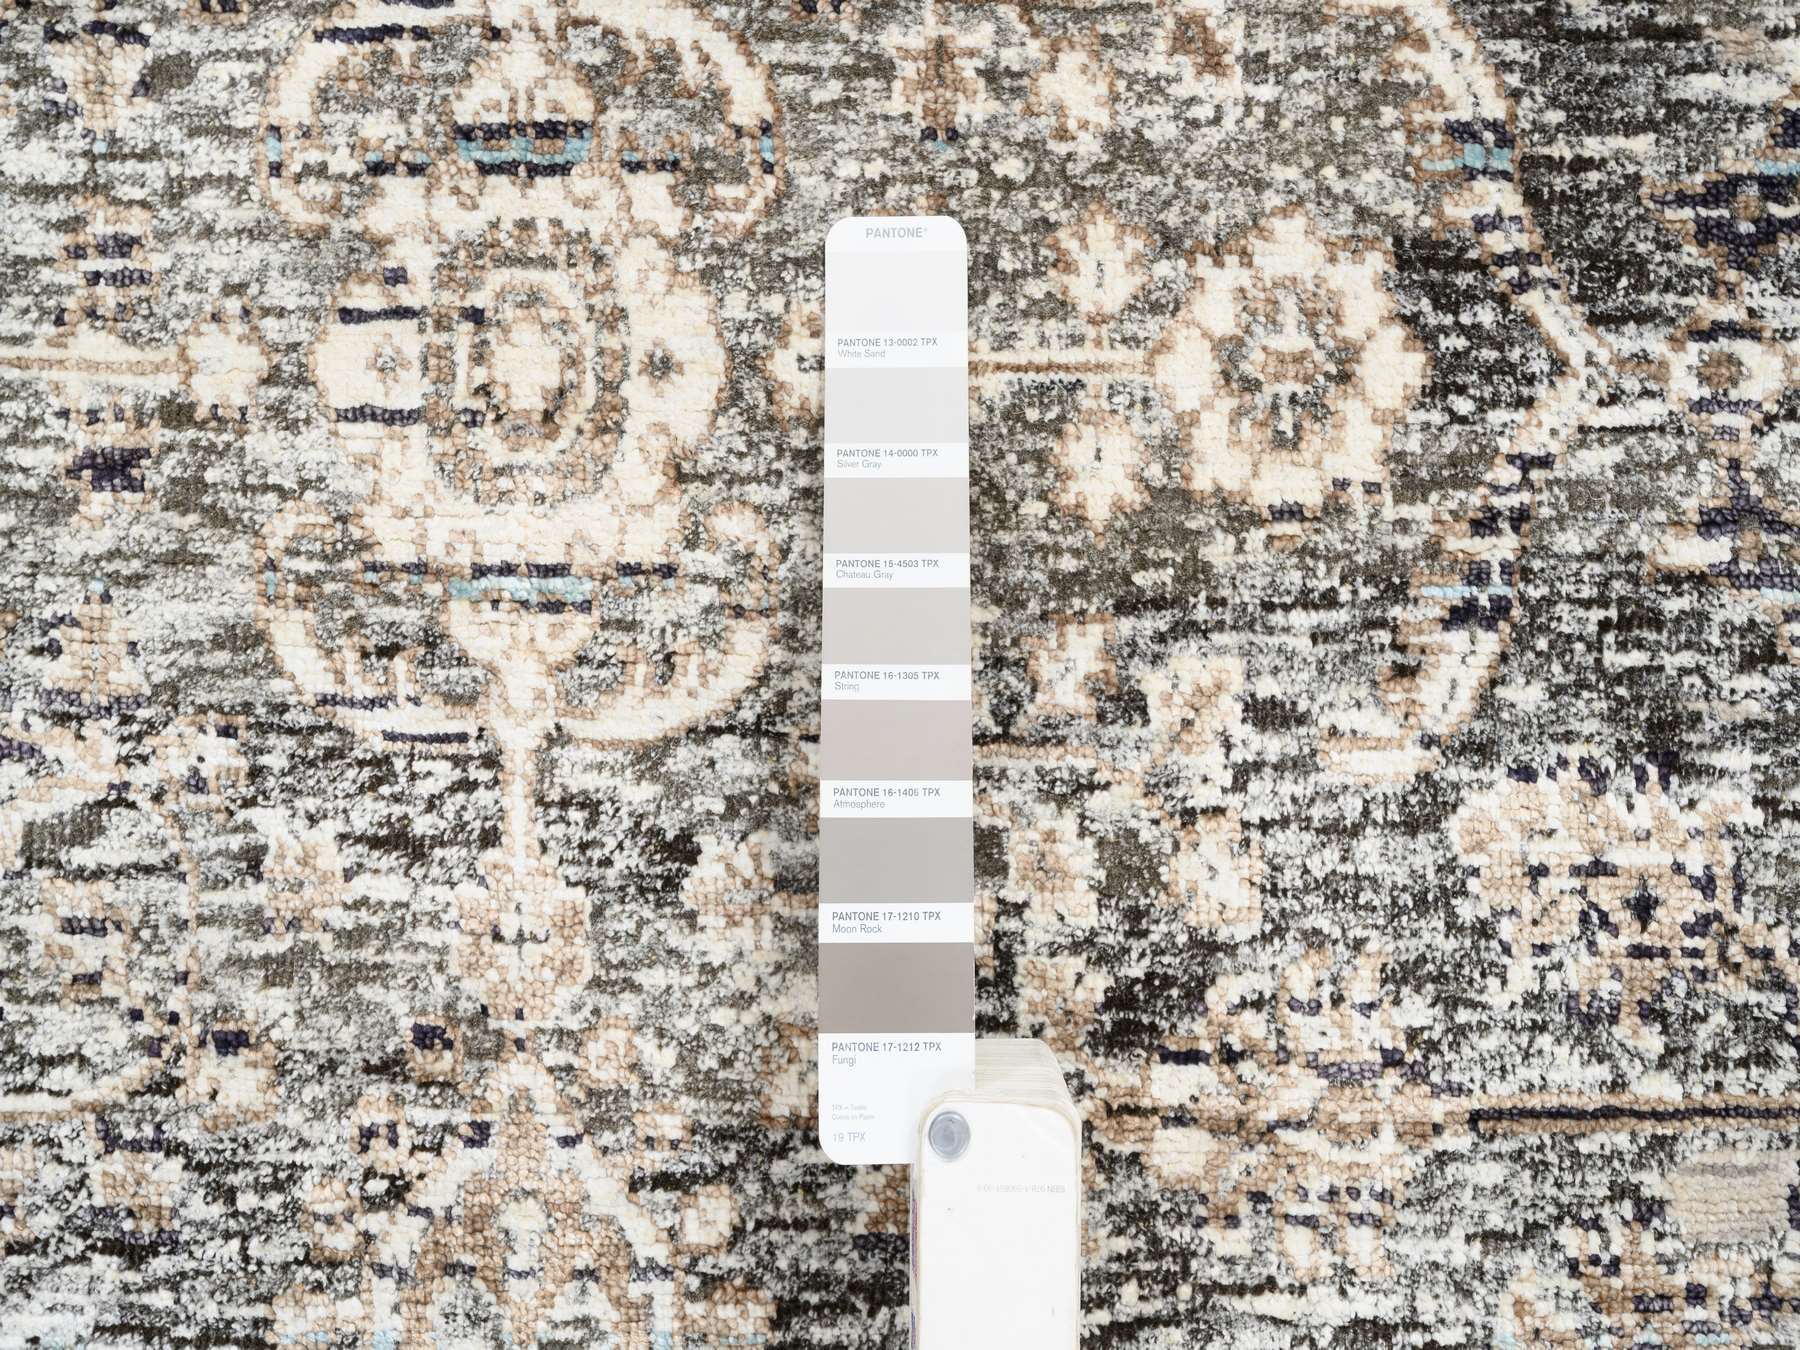 TransitionalRugs ORC584163